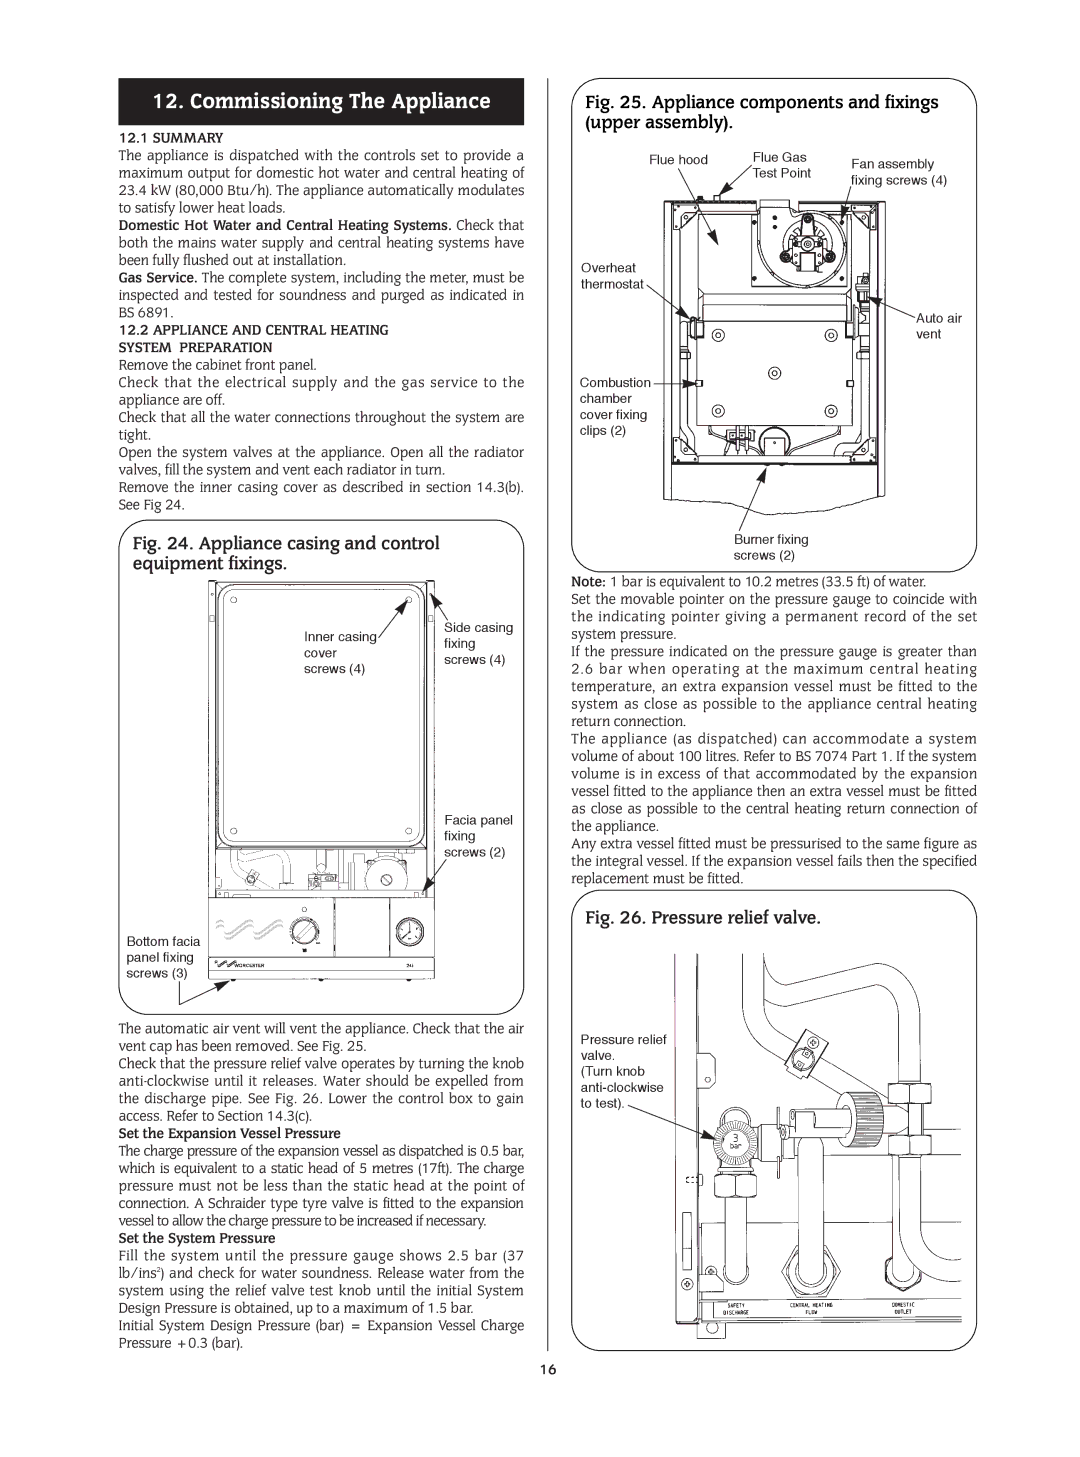 Bosch Appliances 24I RSF manual Commissioning The Appliance, Summary, Appliance and Central Heating System Preparation 